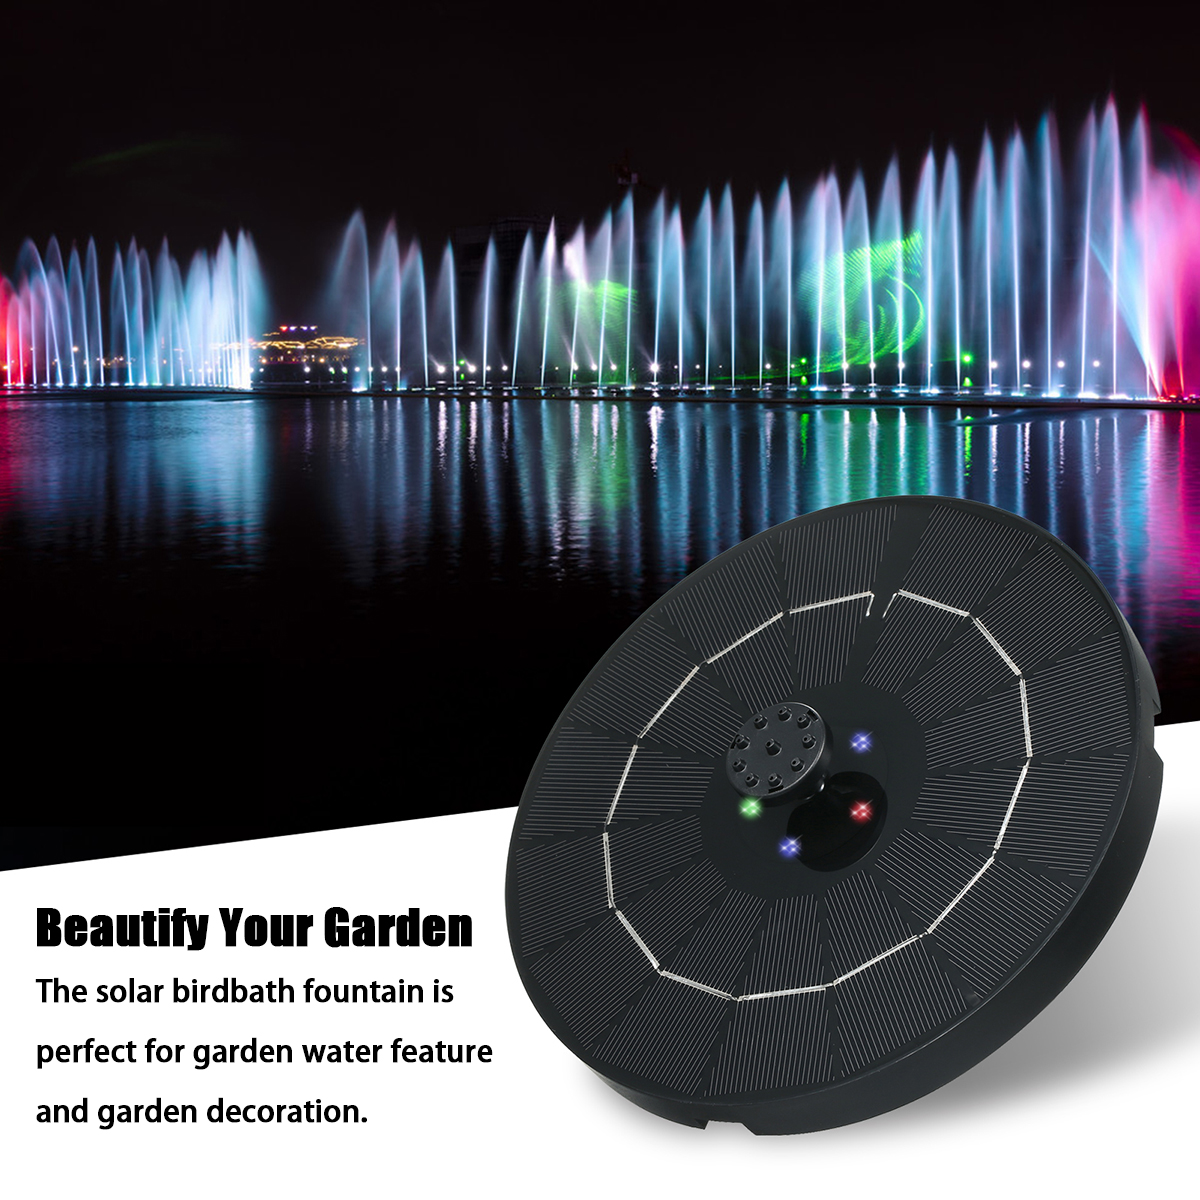 RGB-LED-Solar-Powered-Fountain-Pump-W-6-Nozzles-Water-Pump-Night-Floating-Garden-1879317-5